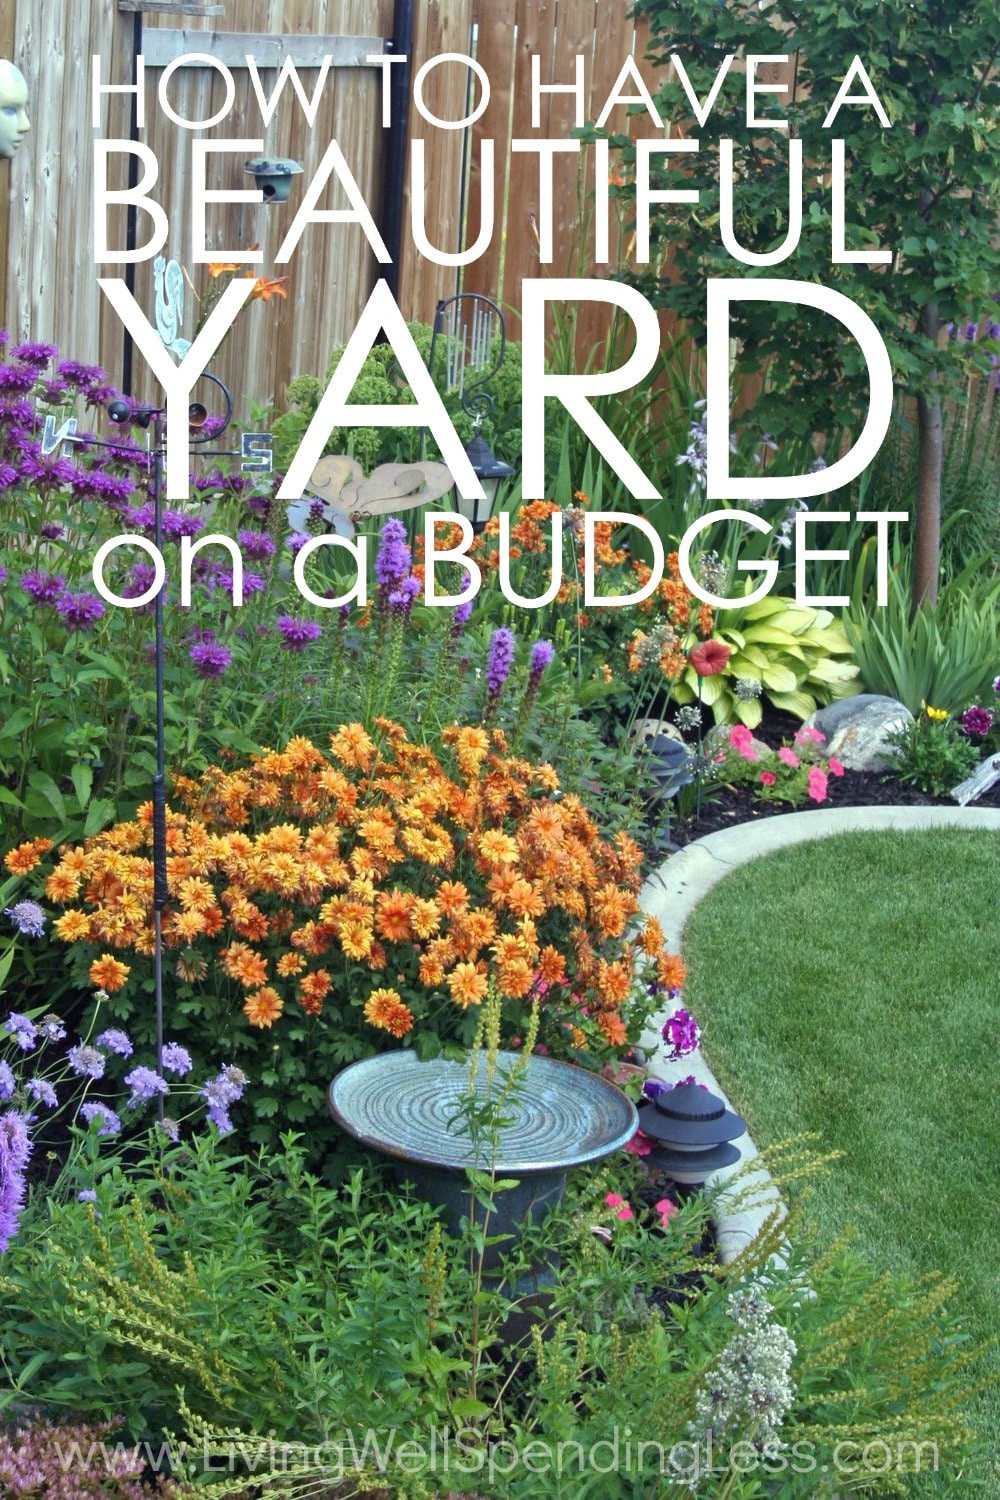 Inexpensive Backyard Landscaping Ideas
 How to Have a Beautiful Yard on a Bud